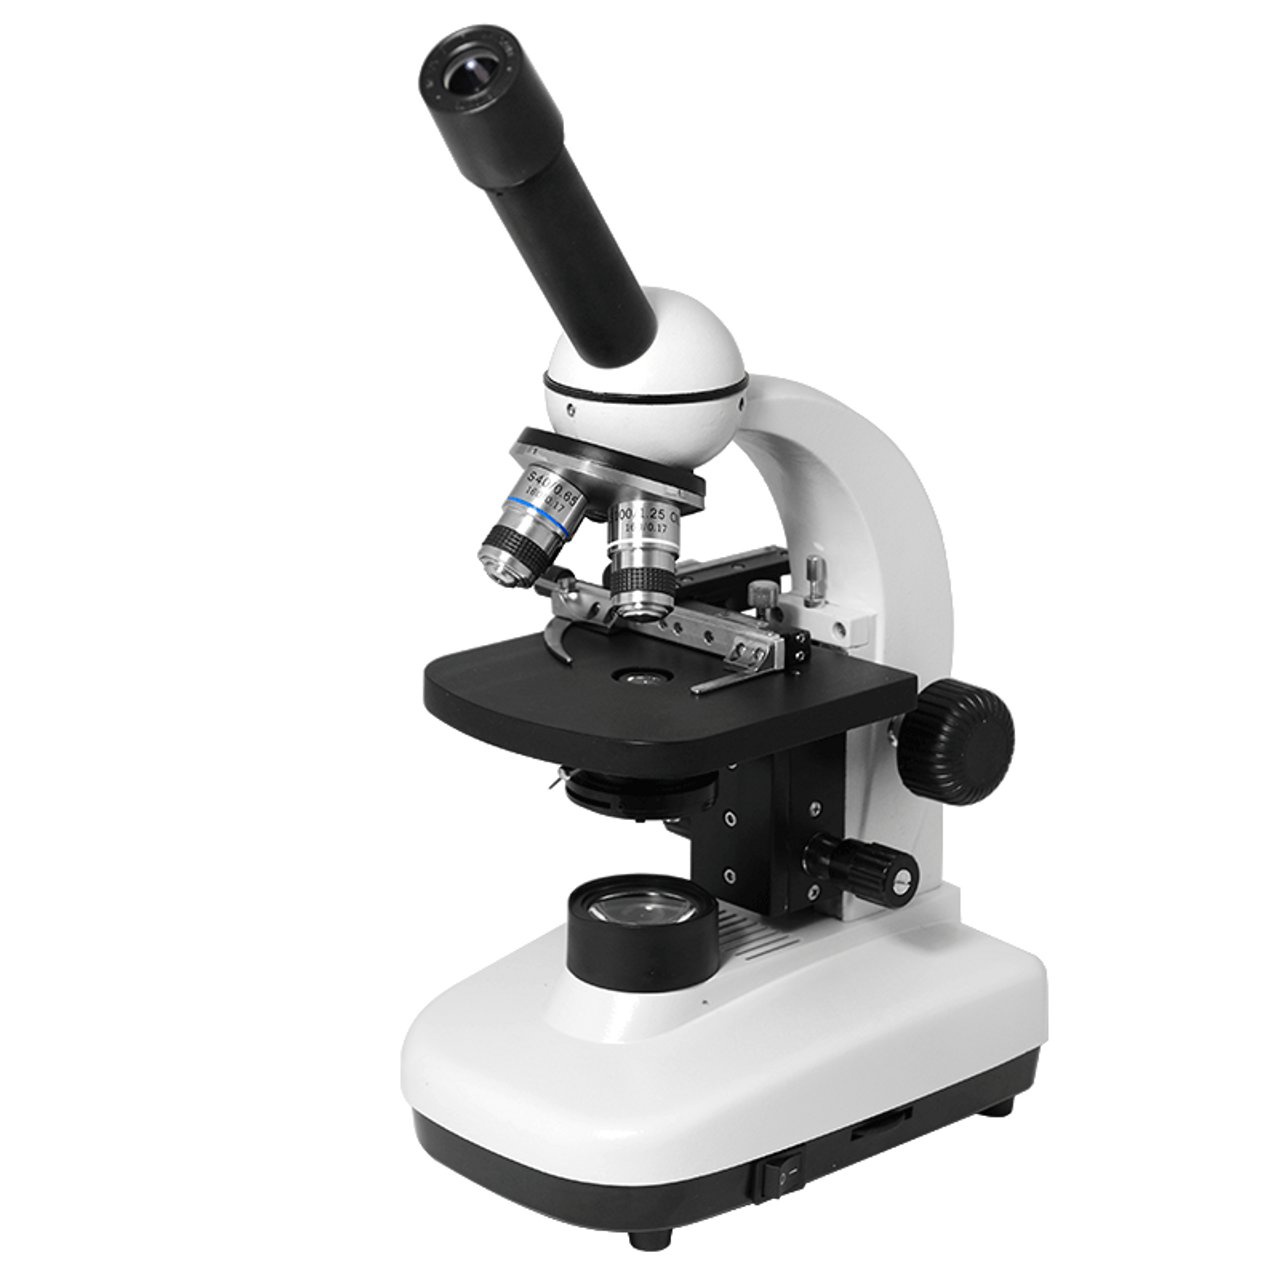 $10 Value Vision Scientific VME0009-RC-P4 Monocular Compound Microscope Package 40x-1000x Magnification 50 Prepared Slides Variety Set Mechanical Stage Microscope Book LED 